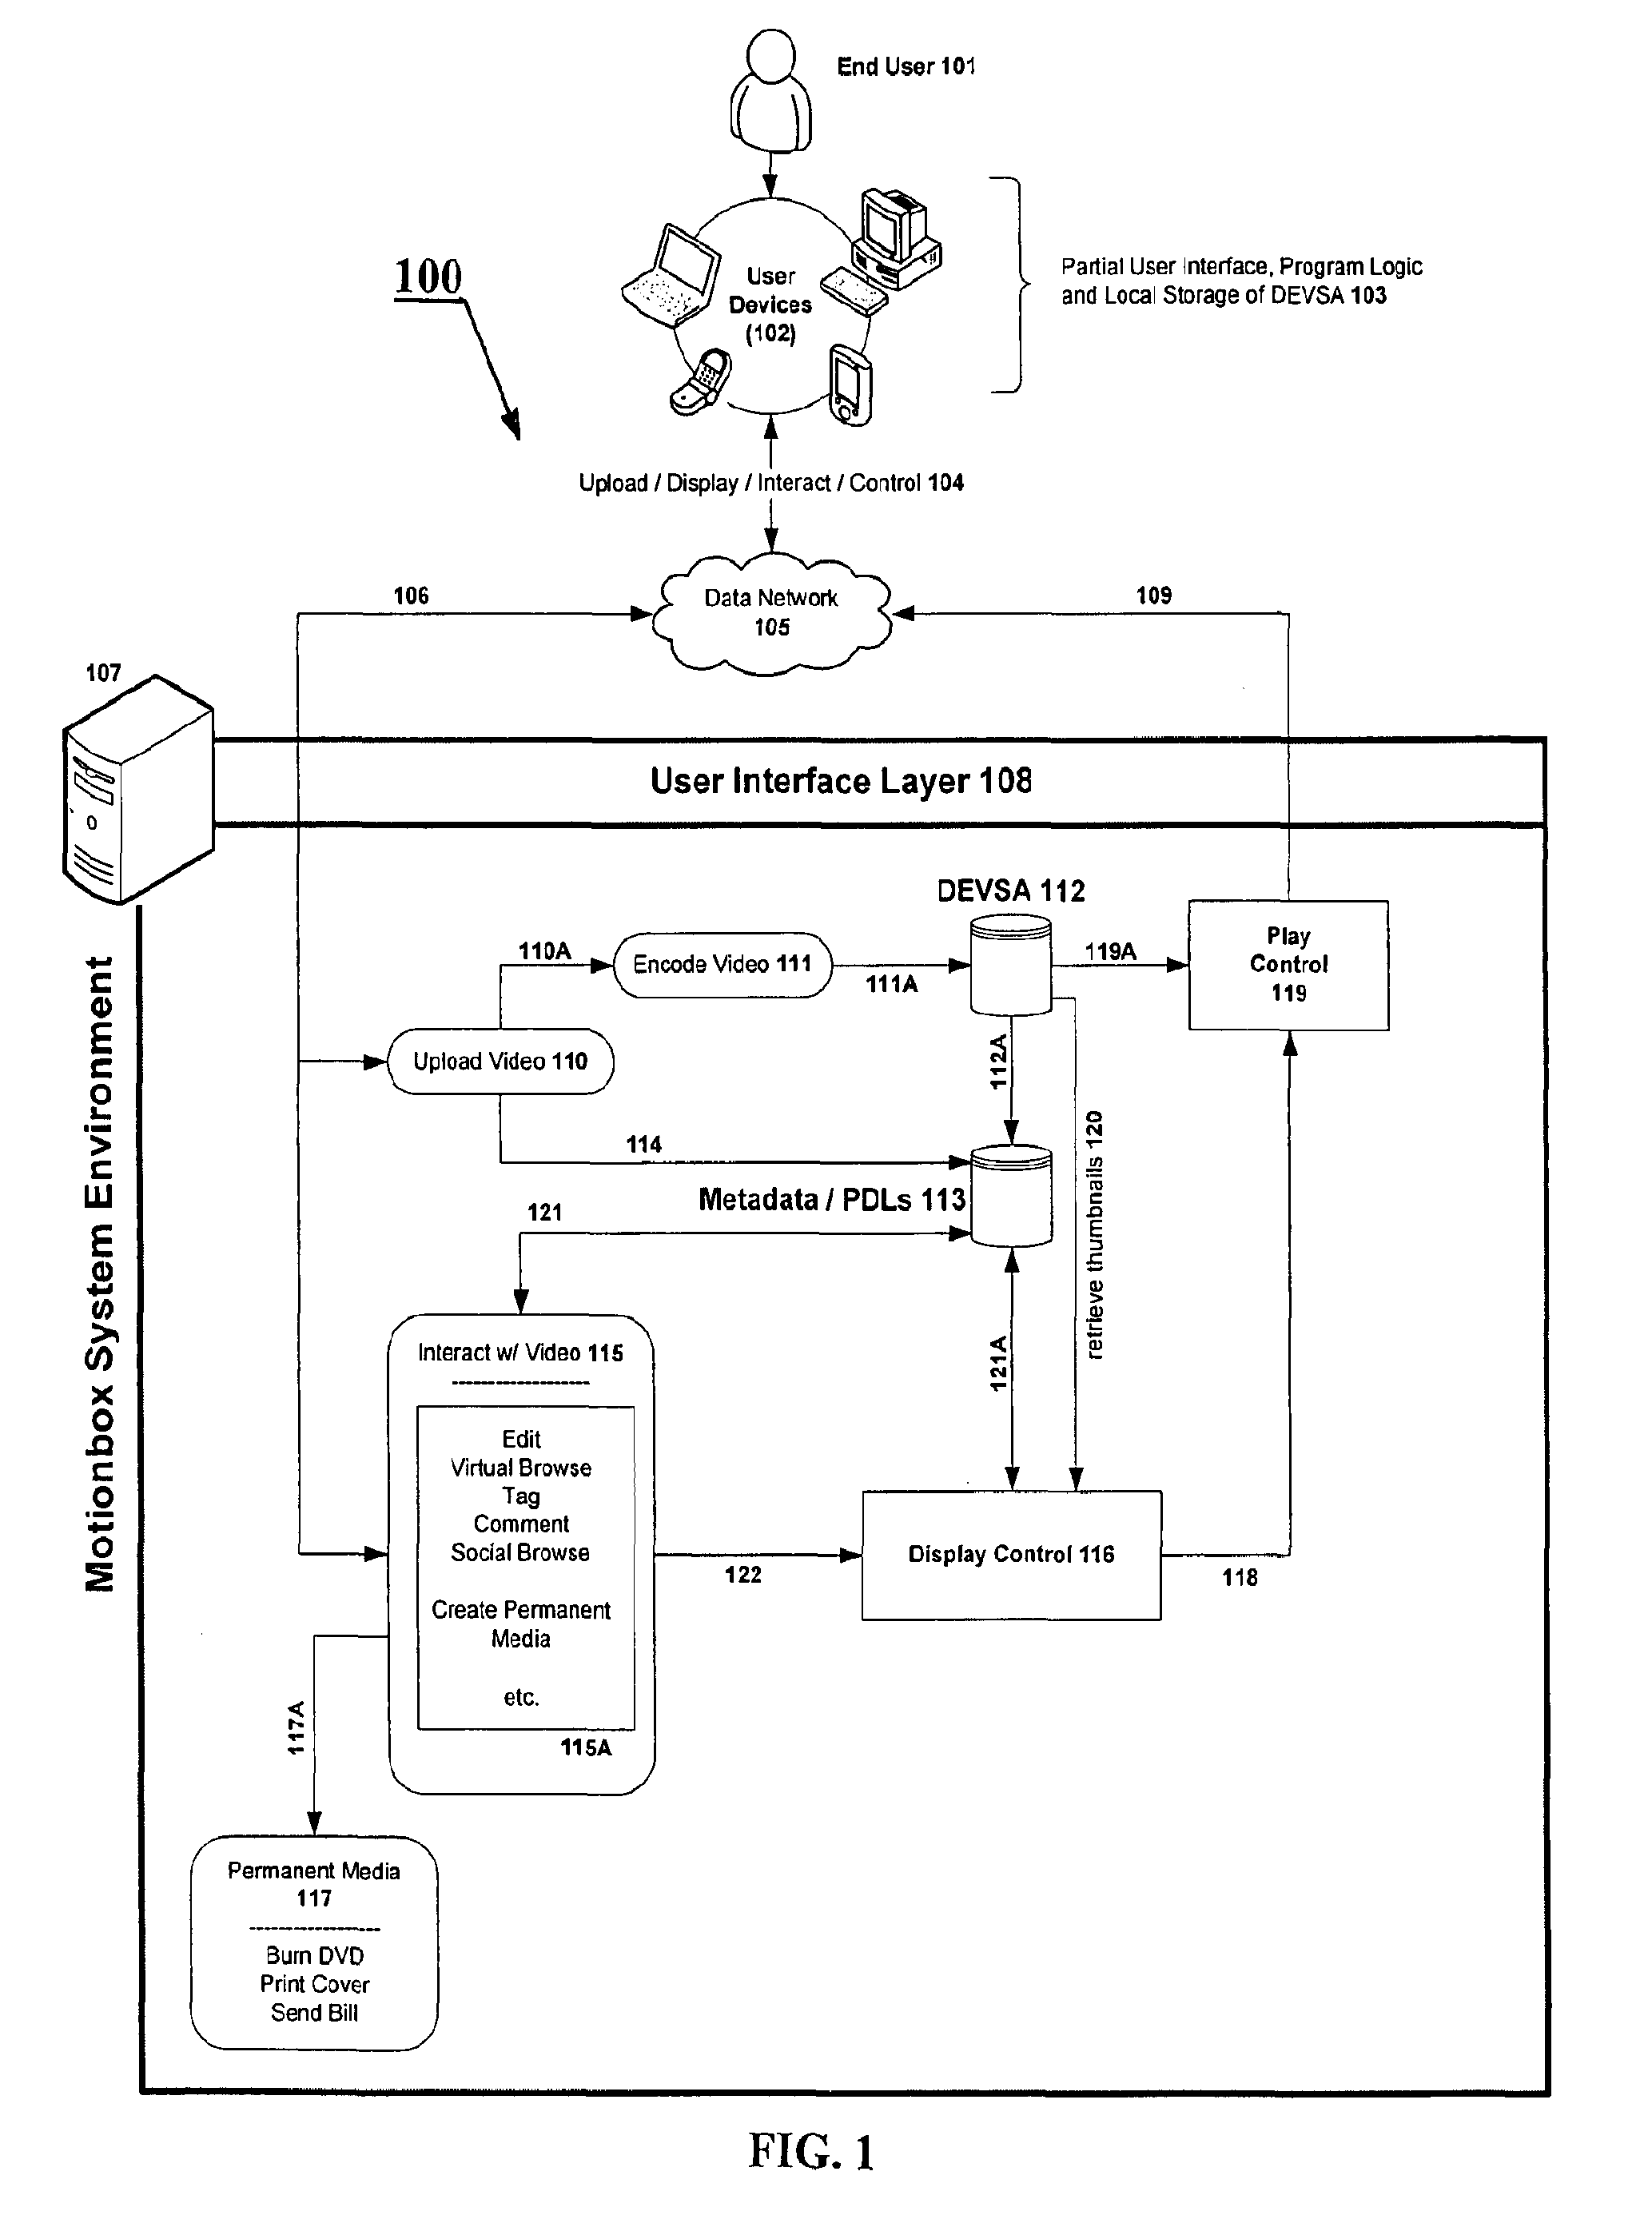 System and data model for shared viewing and editing of time-based media